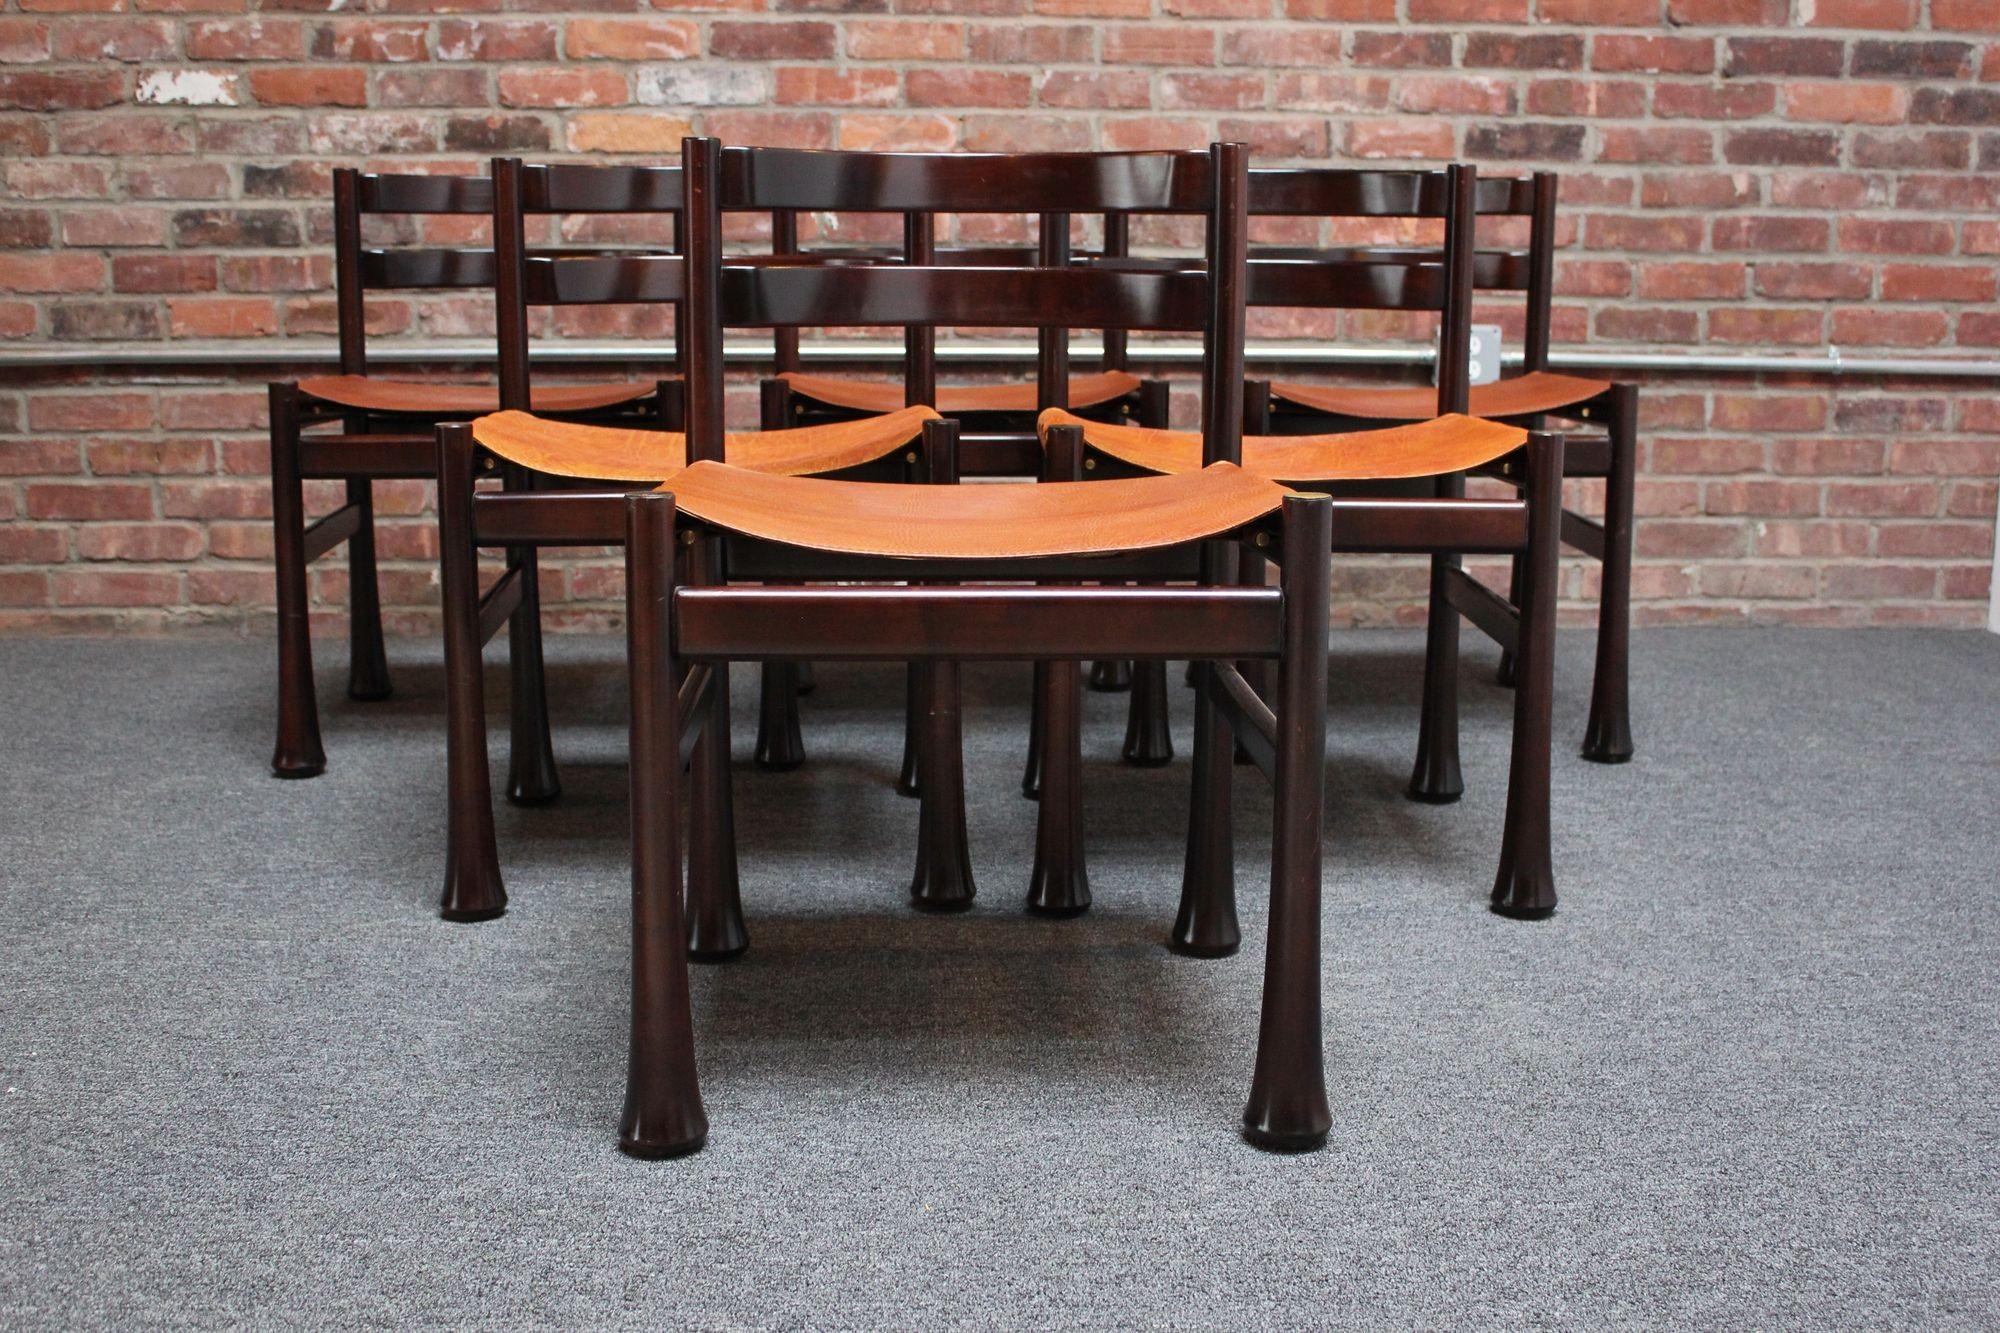 Impressive set of six dining chairs in rosewood with hide leather seats and brass accents by Luciano Frigerio (ca. 1970, Italy).
Deeply sculpted frames with curved slat-back design and thick, robust legs for optimal stability and support. Wide,